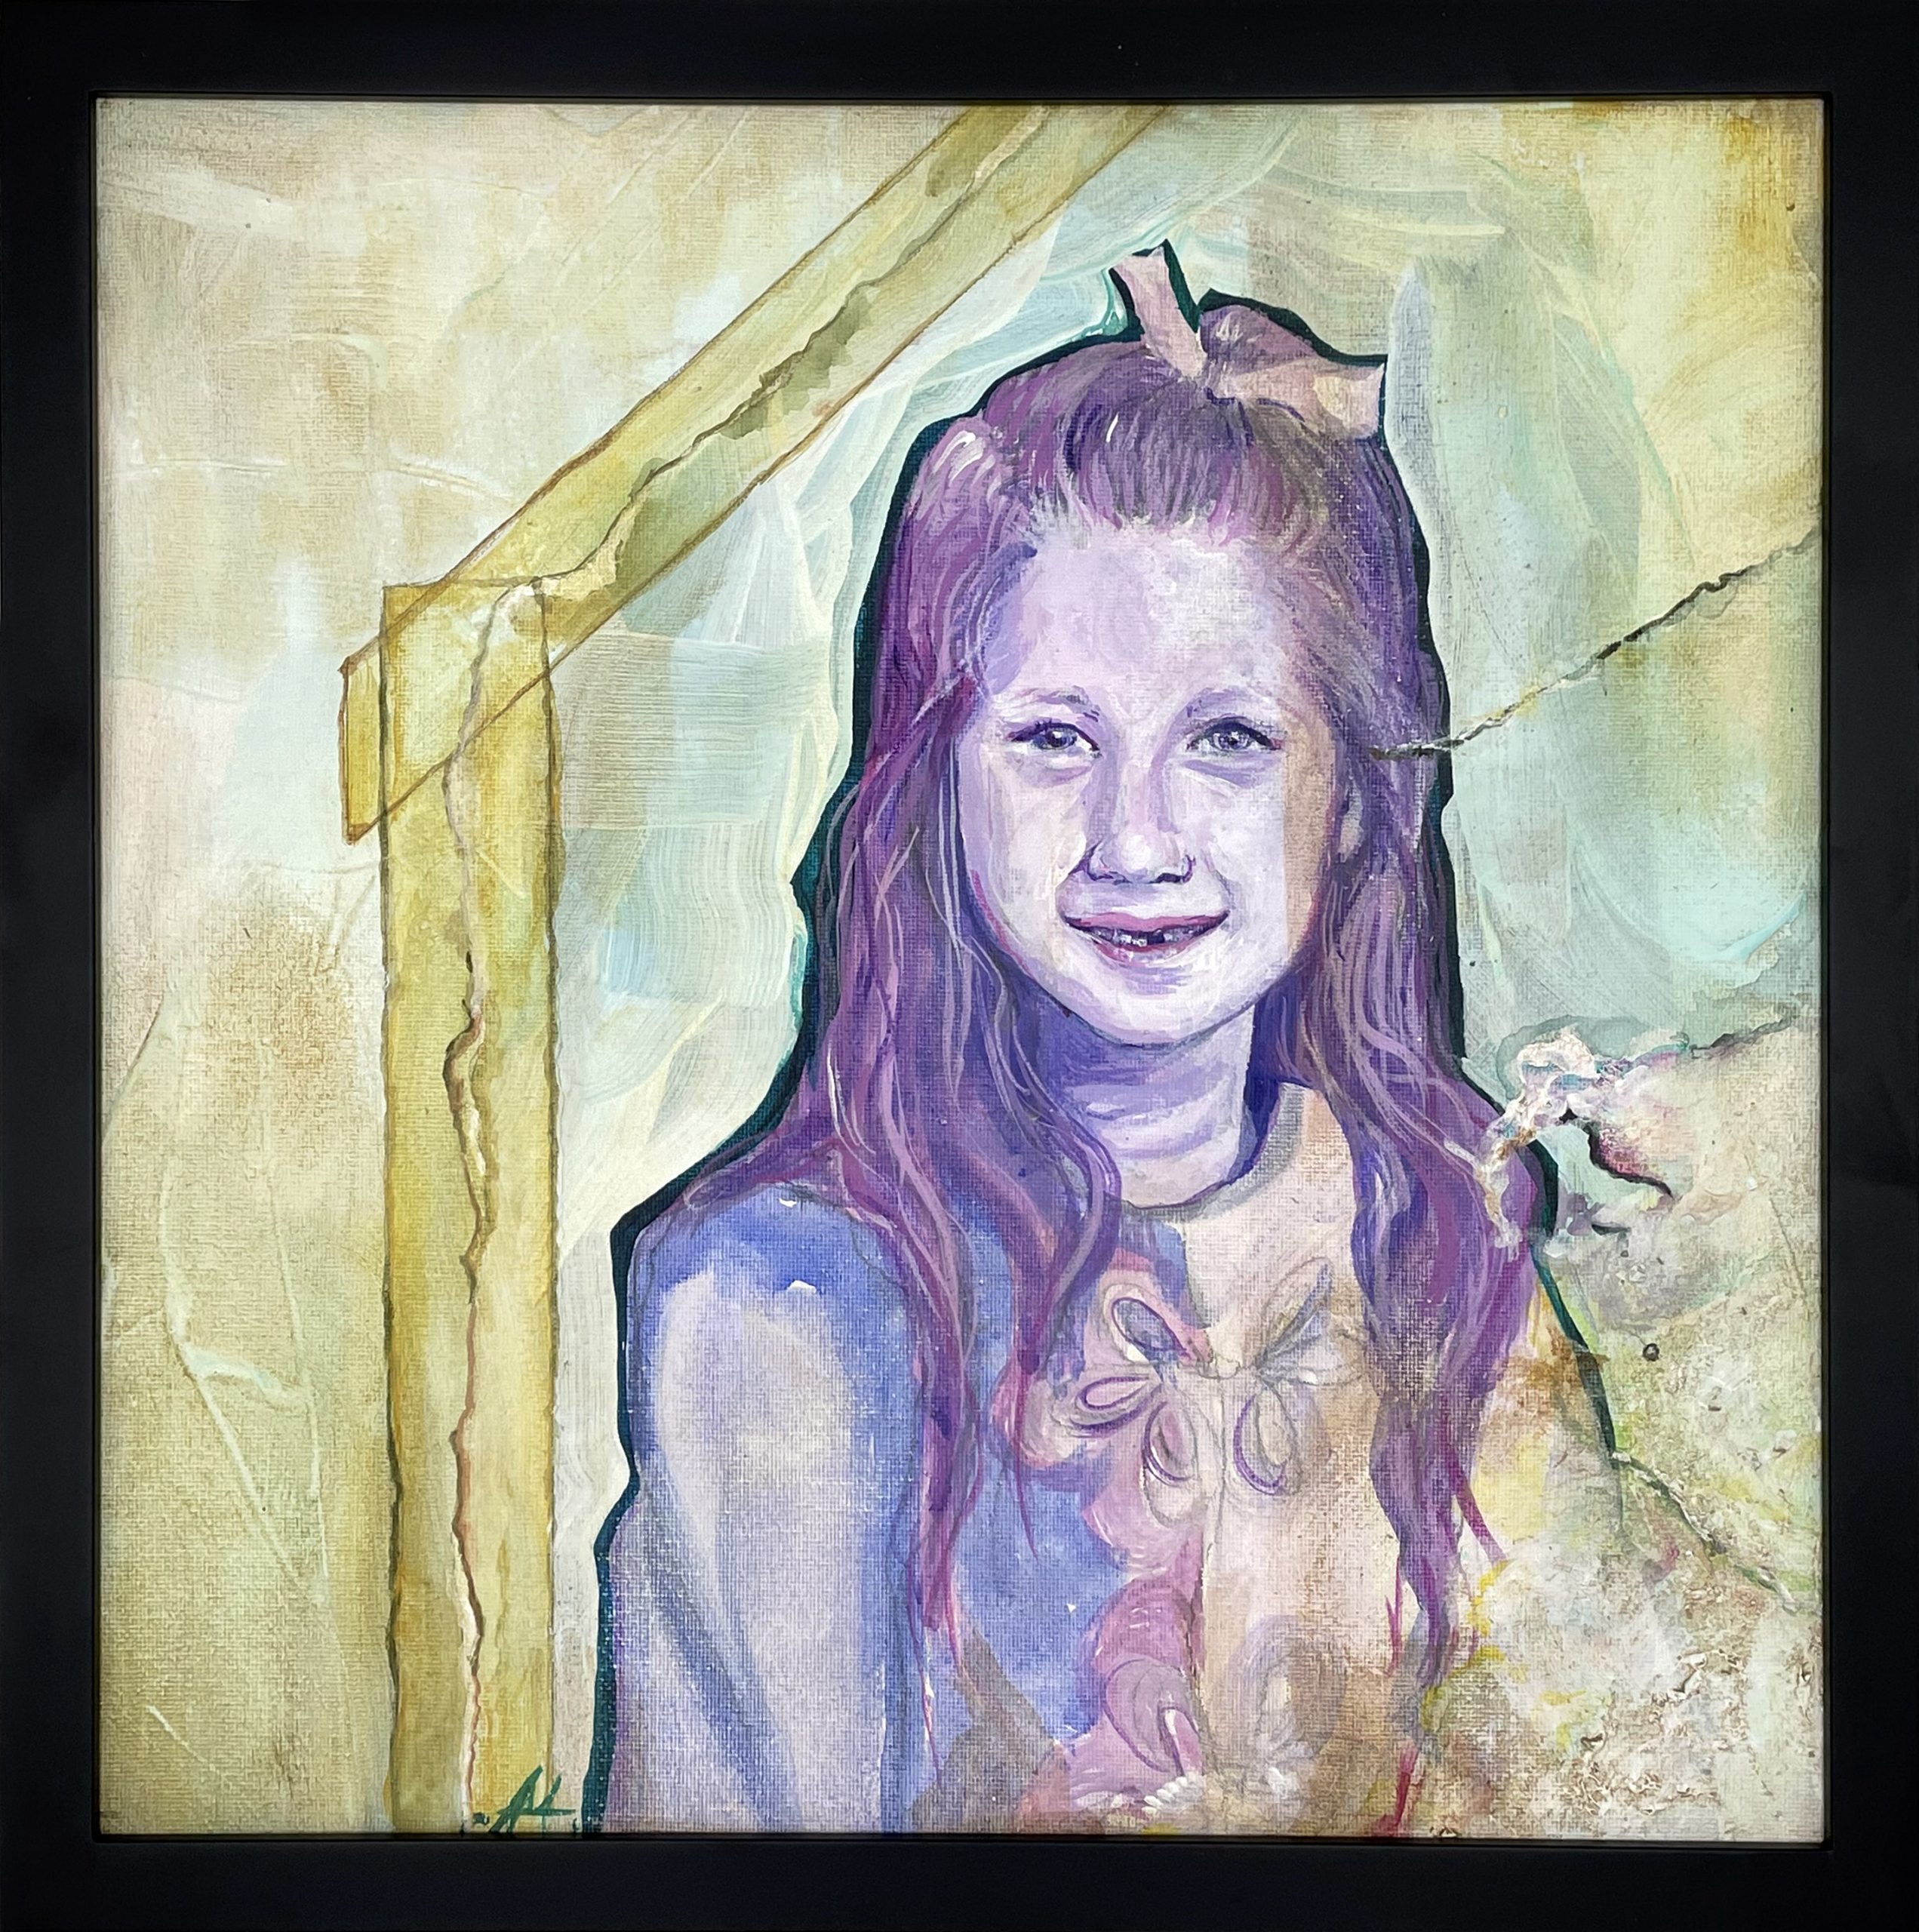 Amy Marsh, In Sickness and in Health, Acrylic on Canvas, 15" x 15" Framed